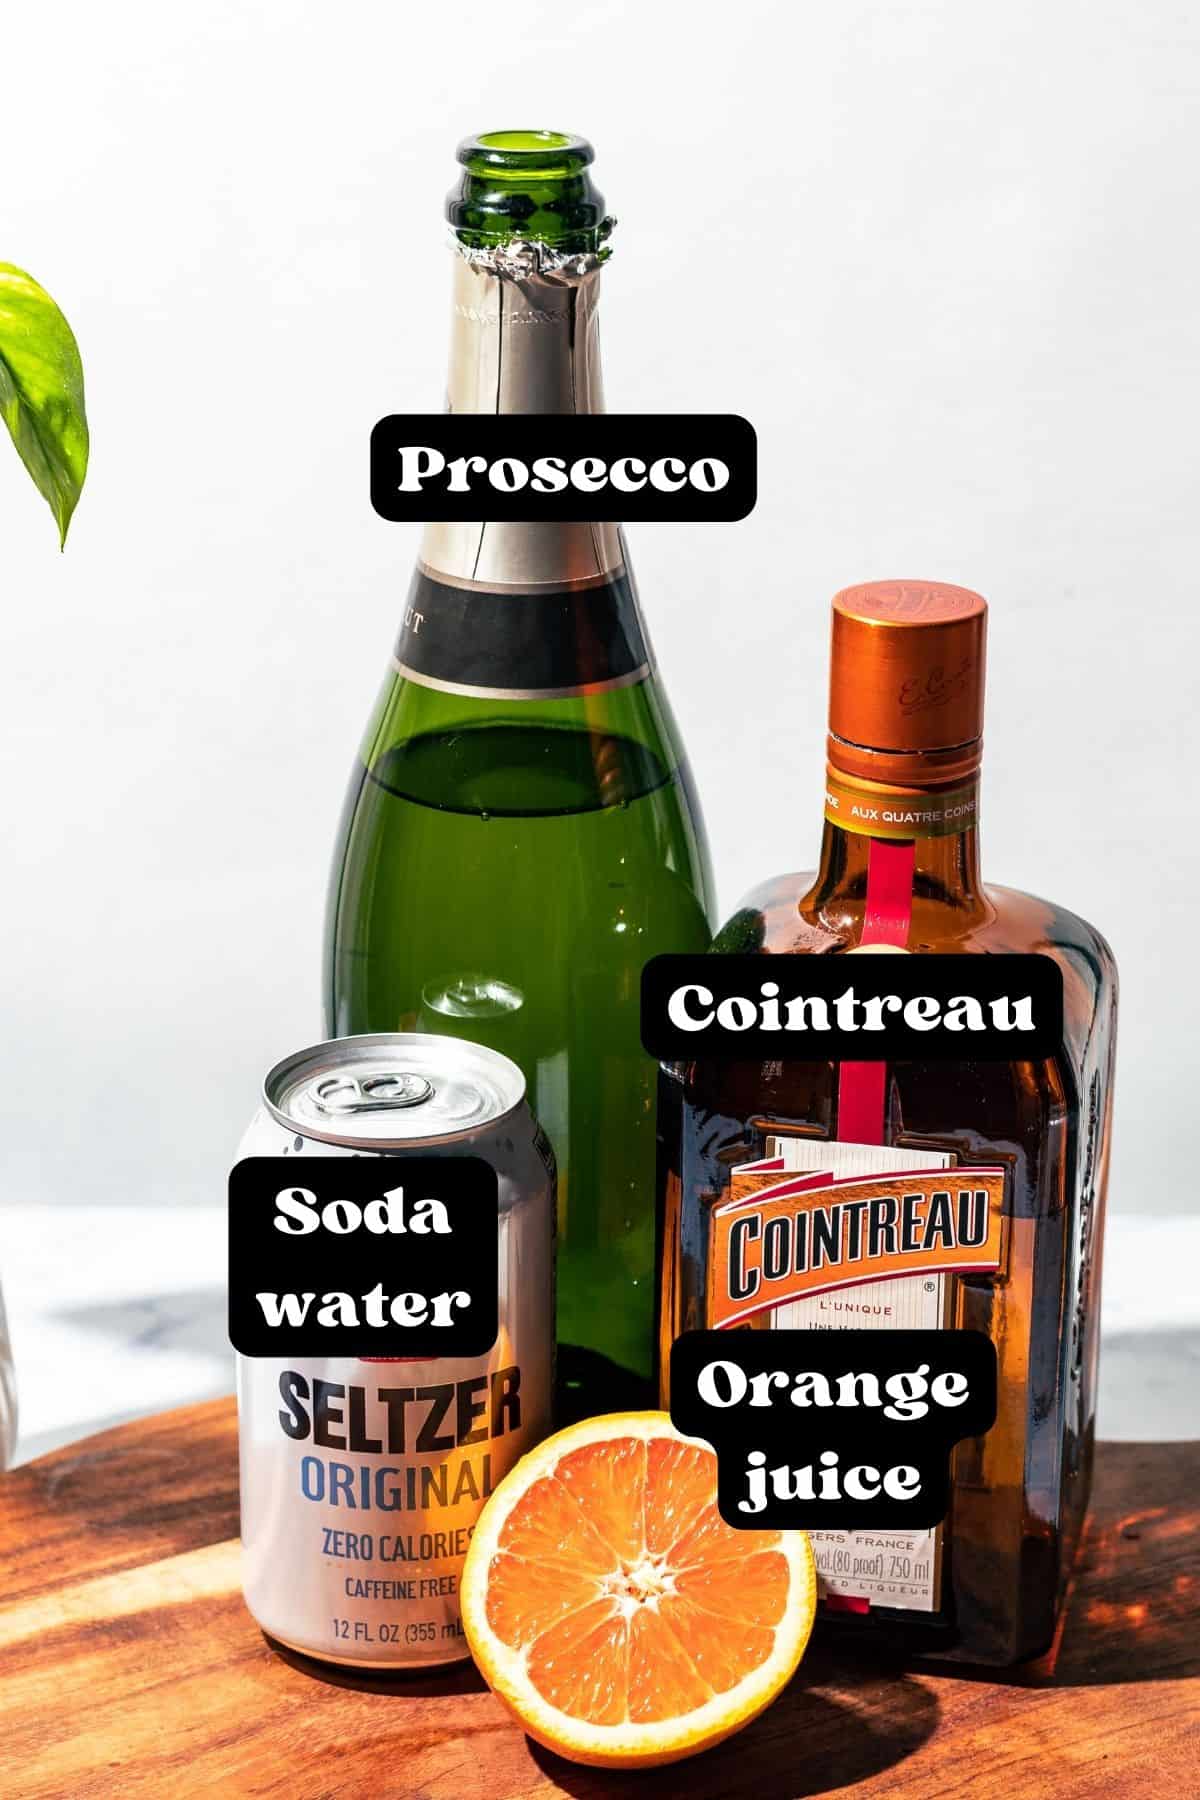 Ingredients for the cocktail spread out on a wood surface.